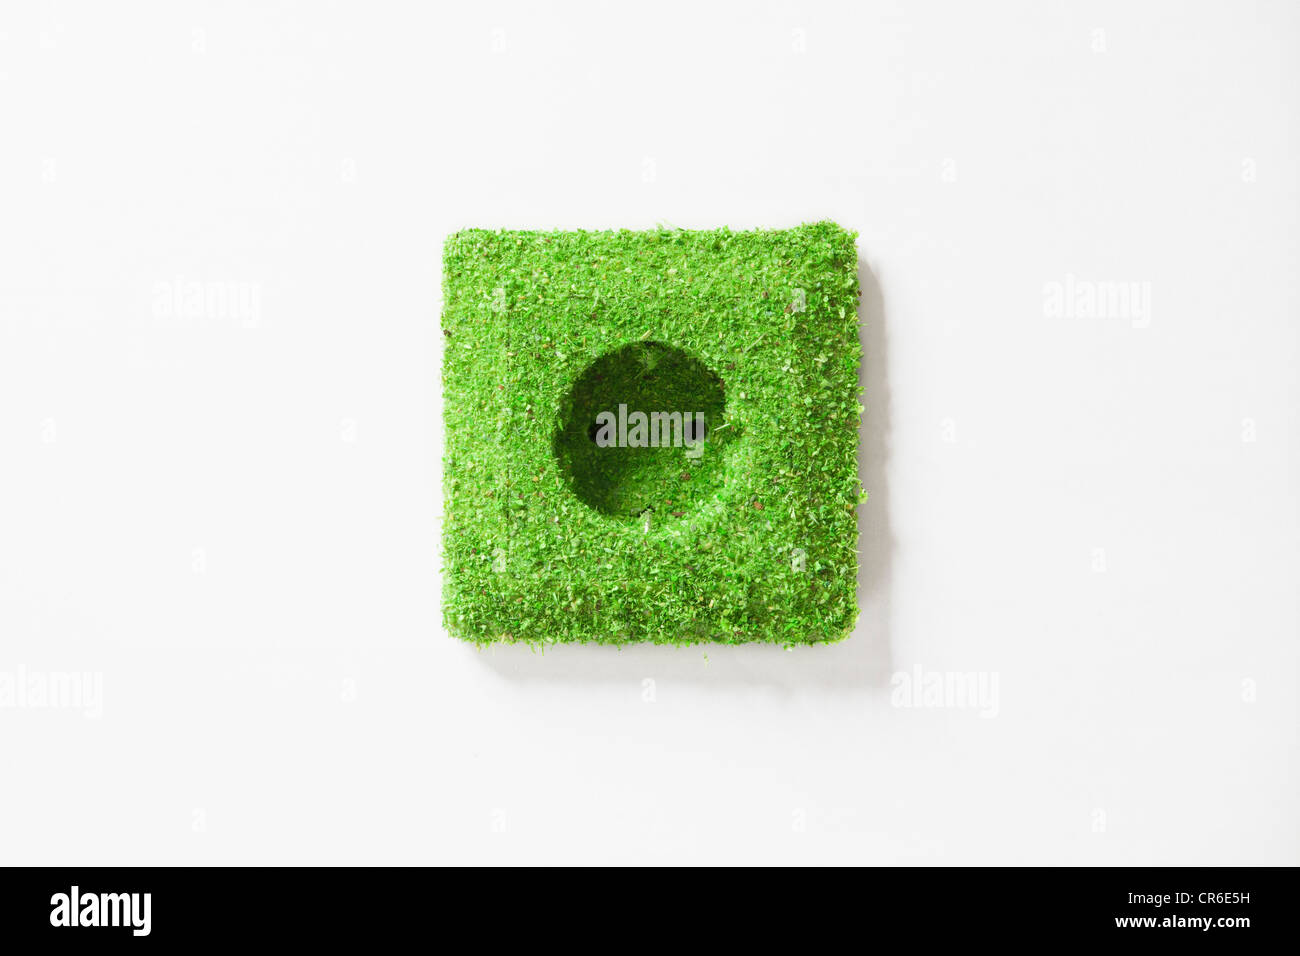 Electrical outlet covered with grass against white background Stock Photo